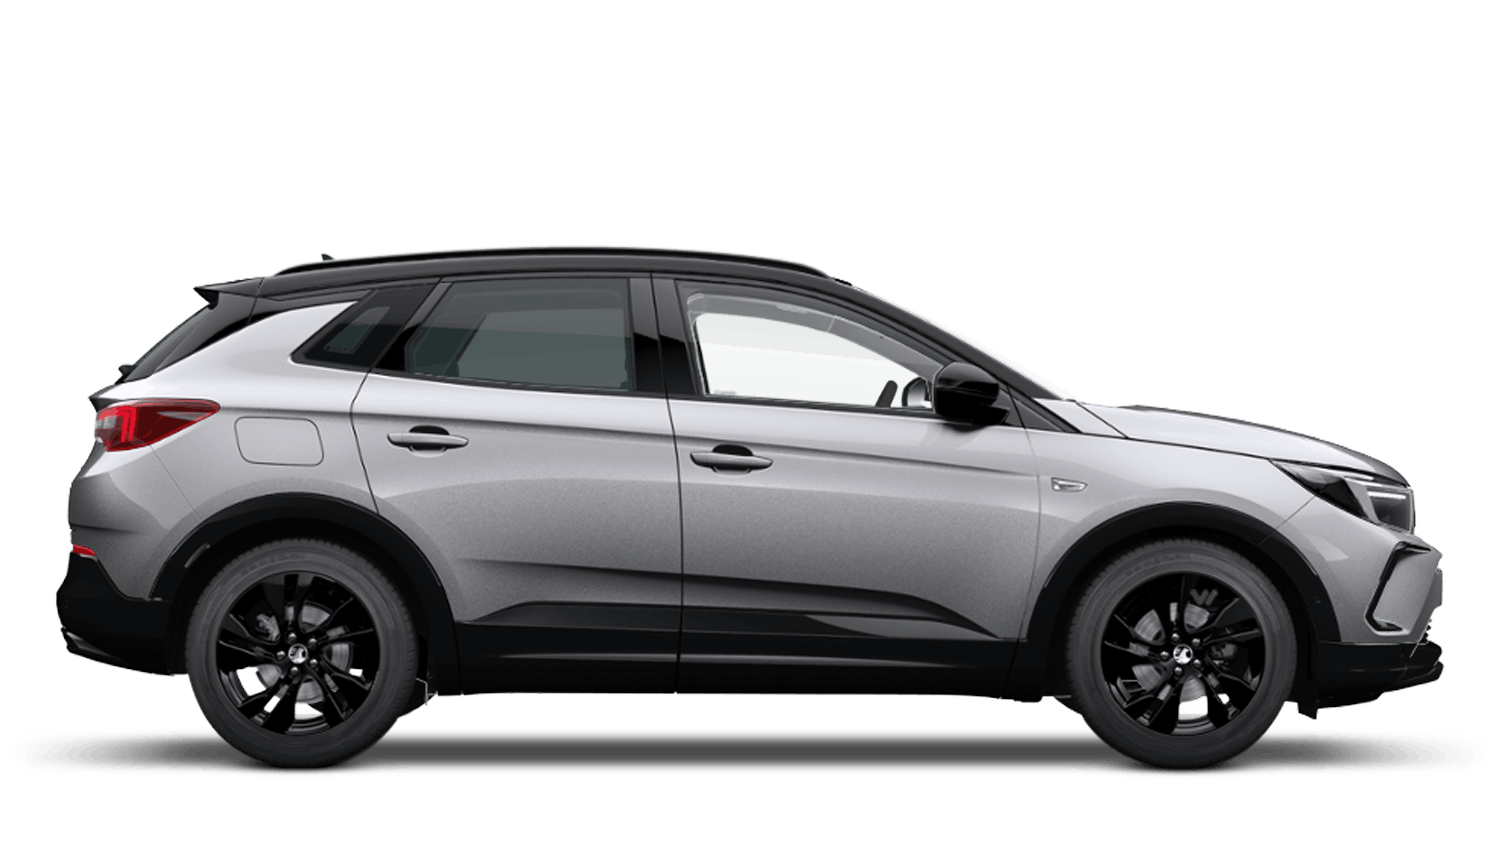 Grandland Plug-In Hybrid with up to £3,800 finance deposit contribution 9.6% APR